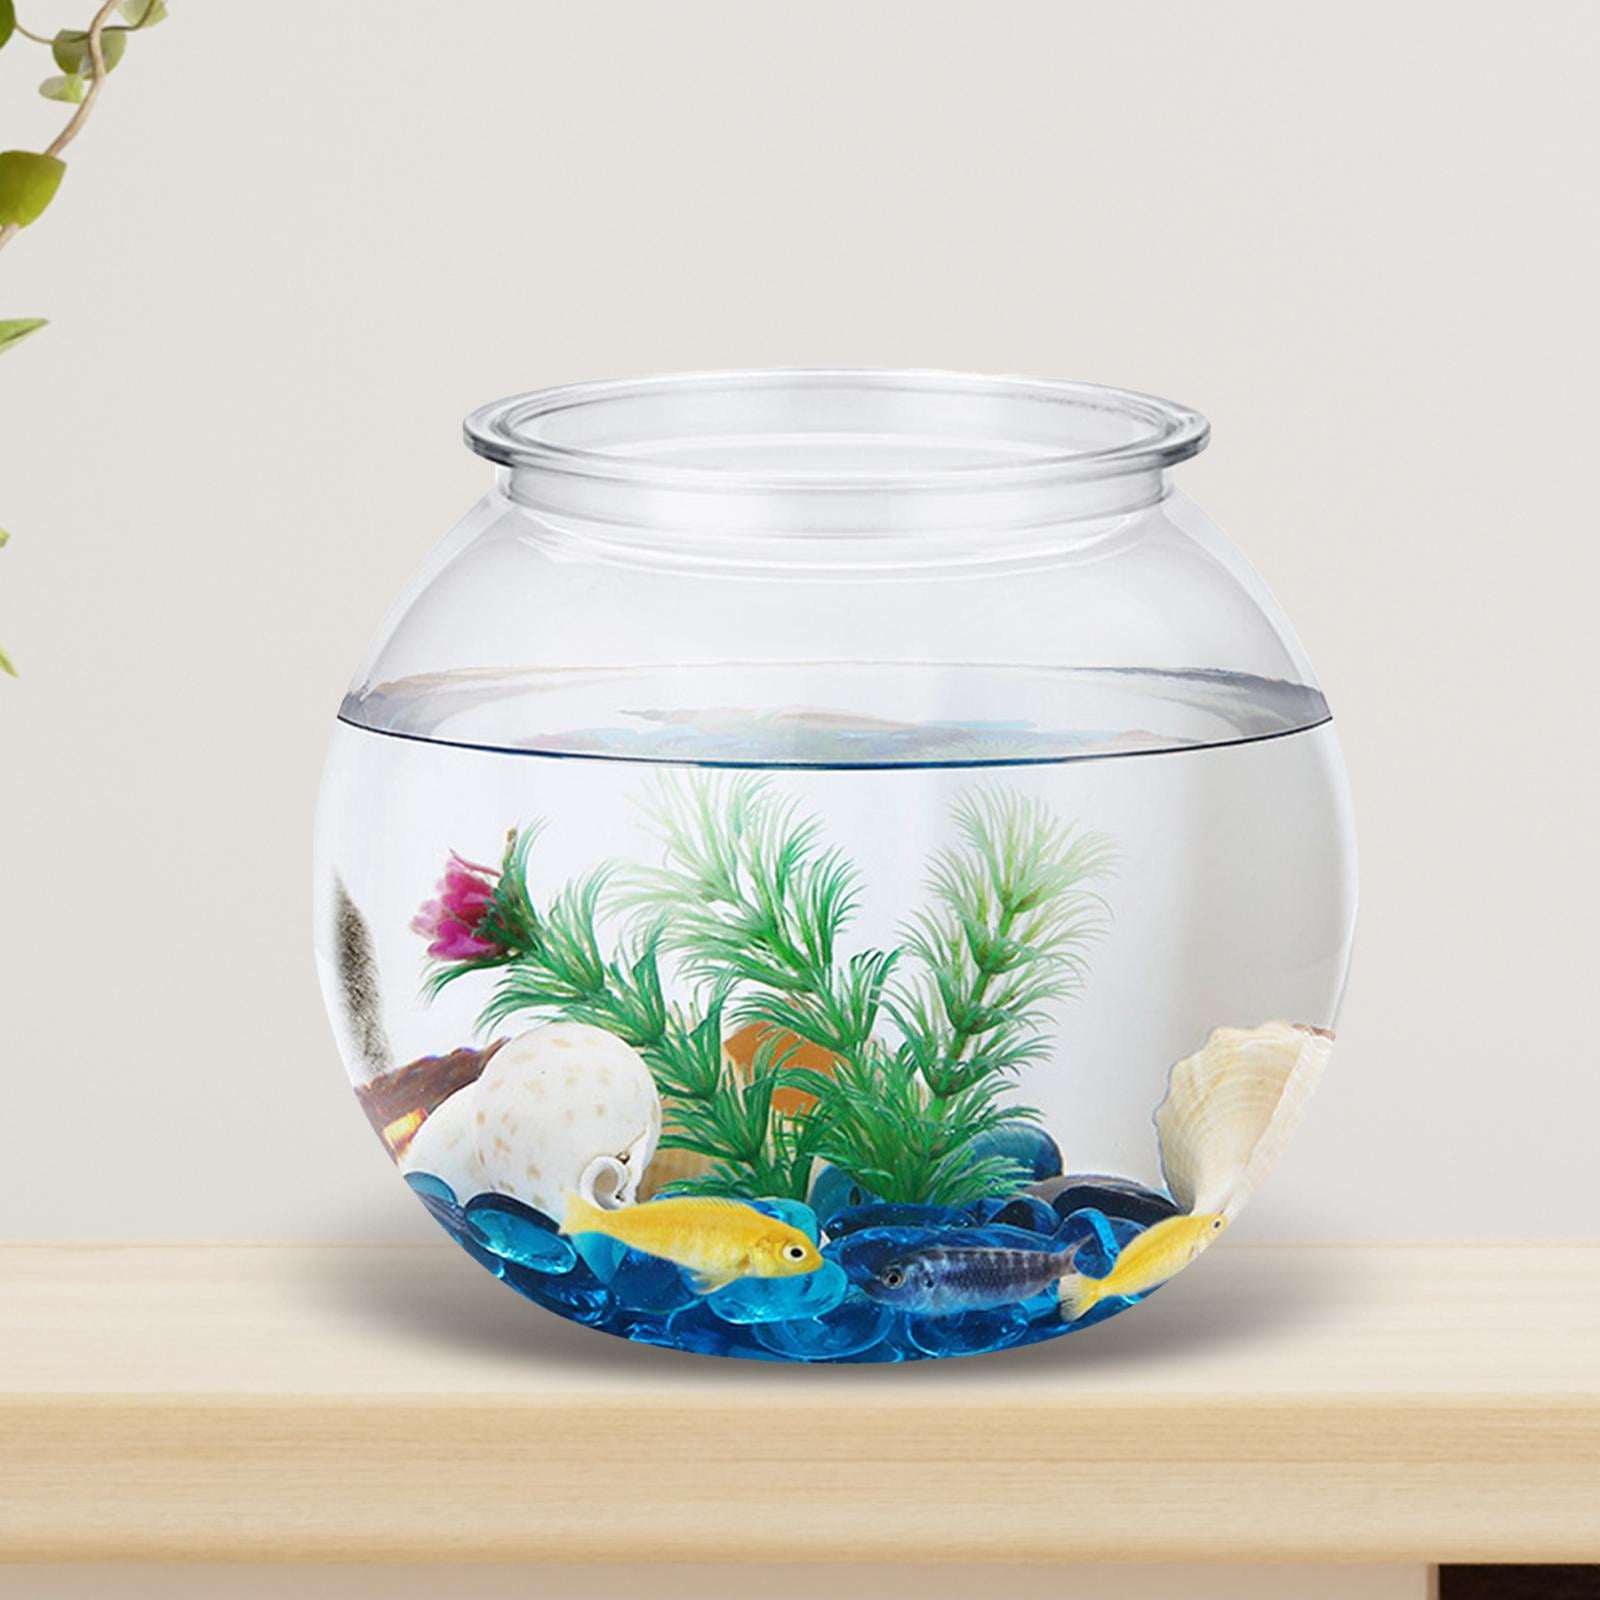 Transparent Small Fish Tank, Fish Bowl Vase Table Round Small Household DIY  Fishes Tank Clear for Desktop Living Room Office table M 